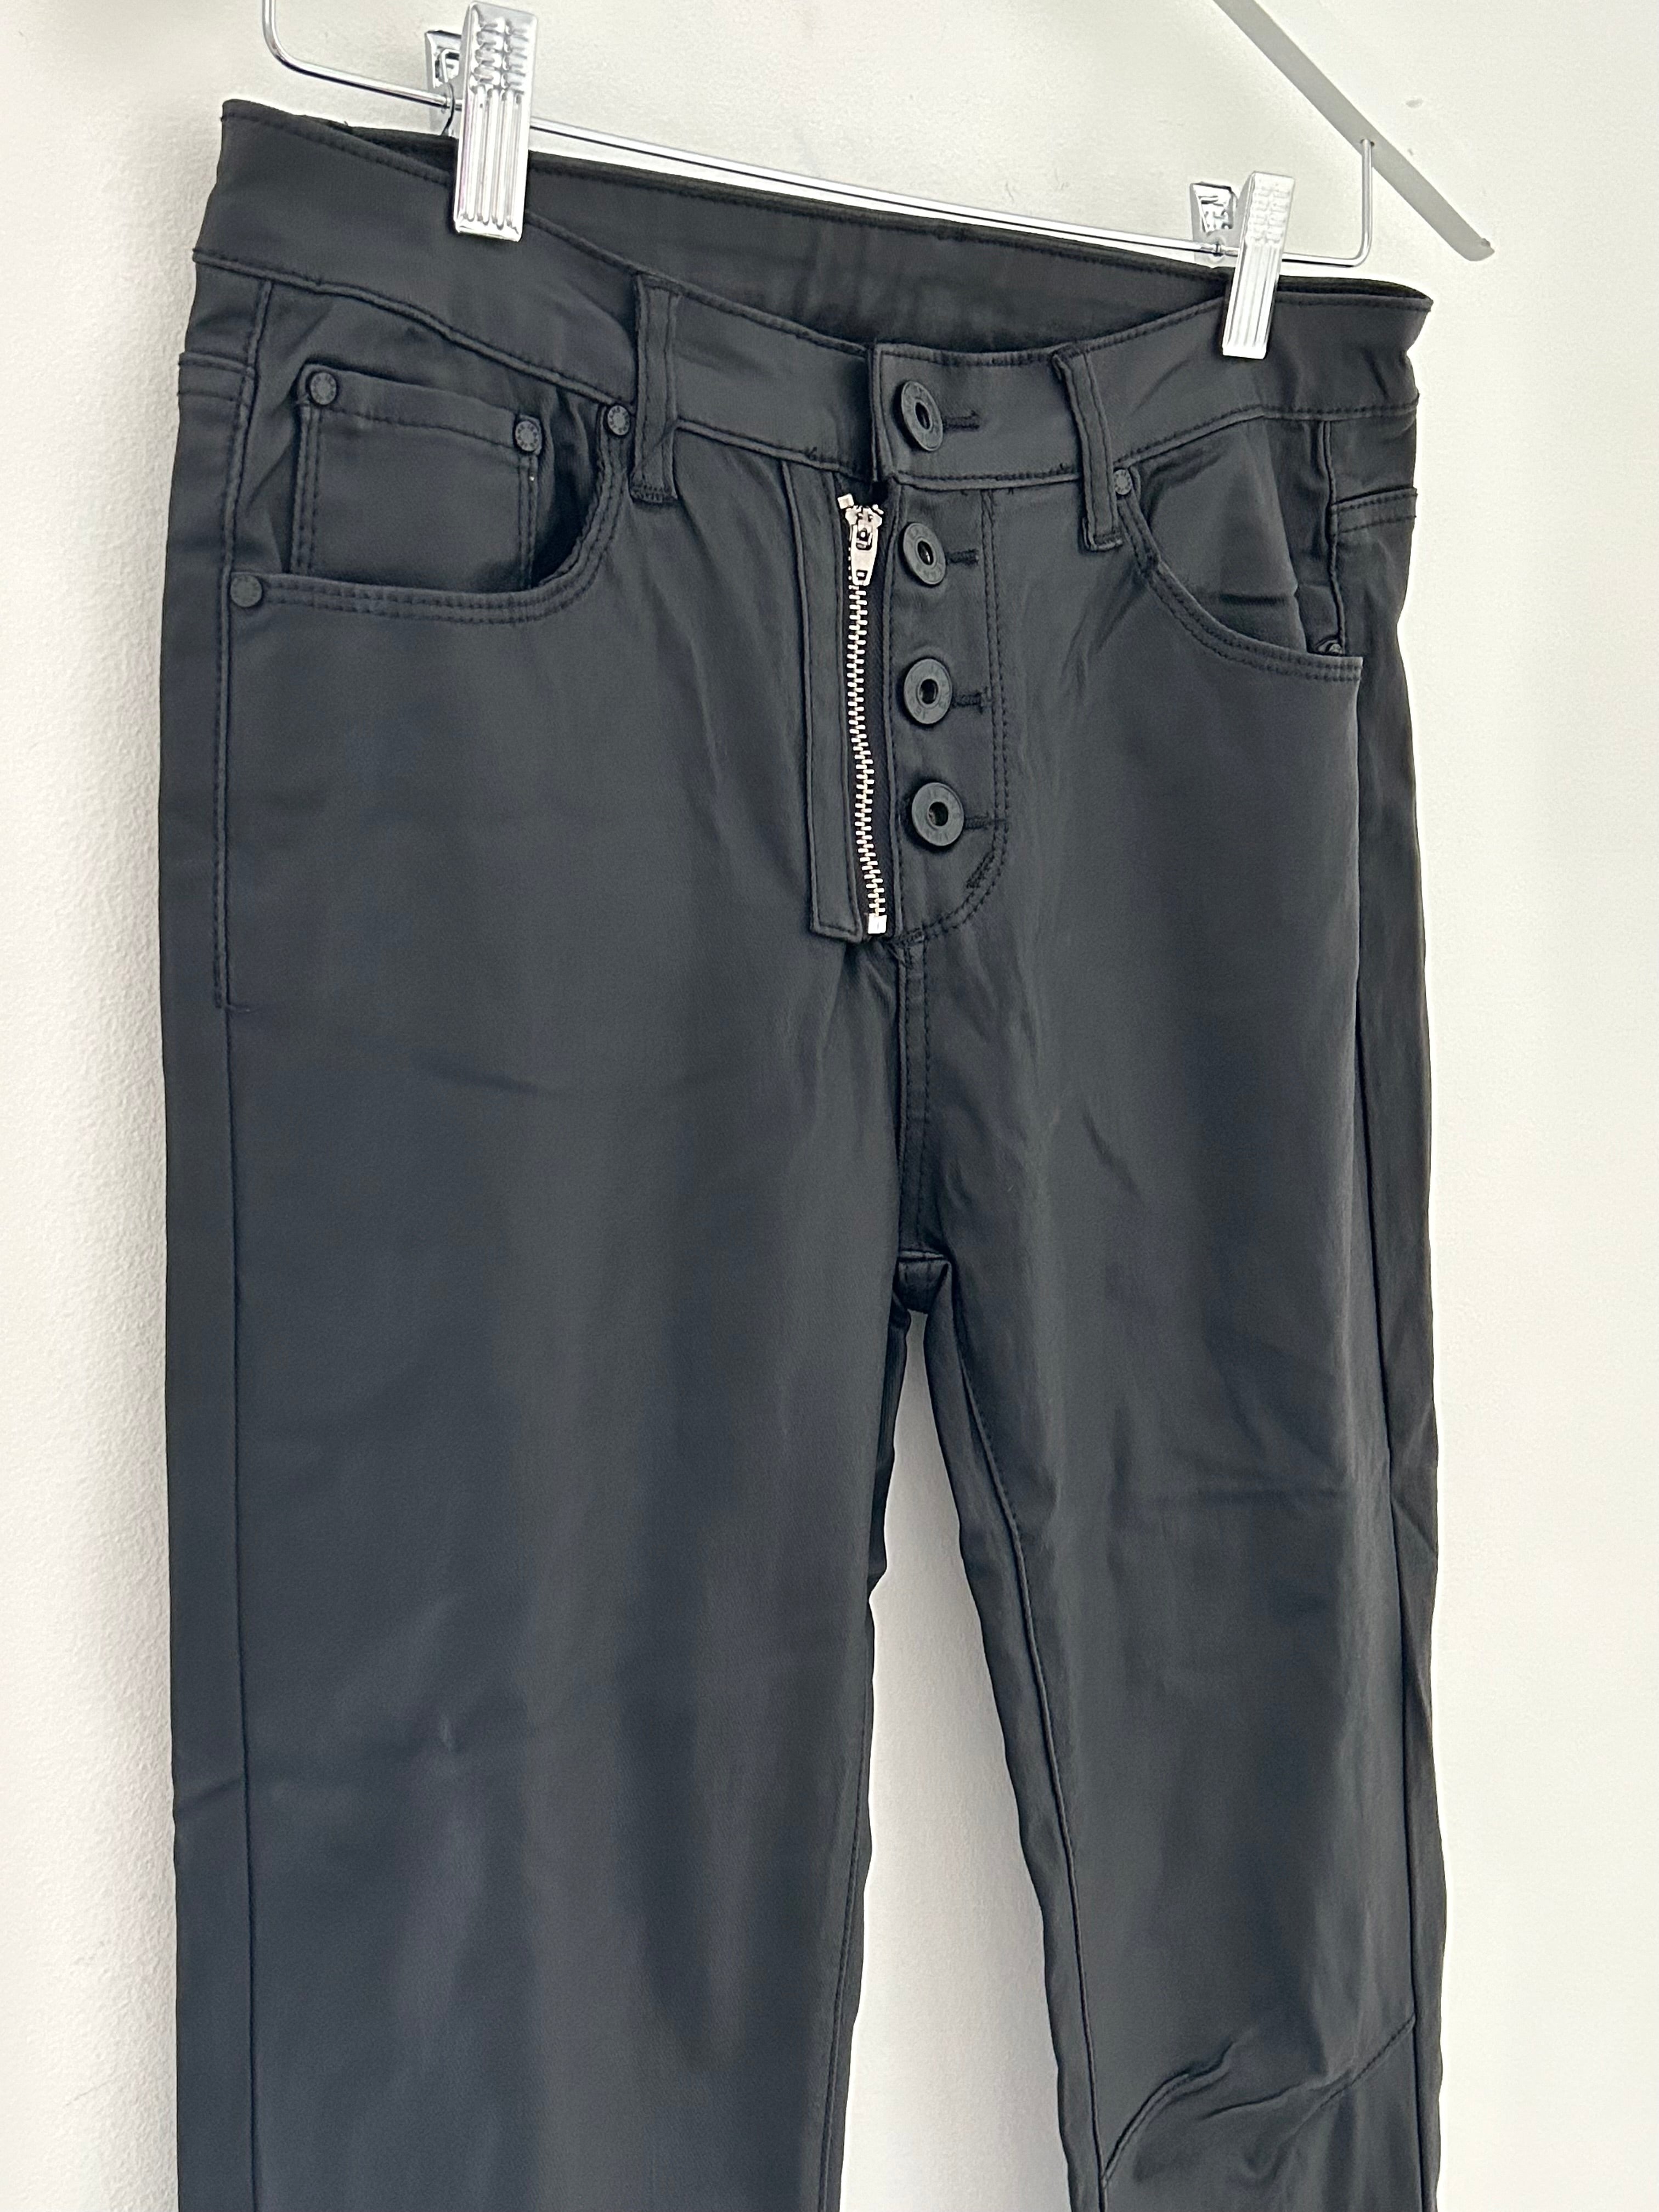 Button Jeans in Waxed Black